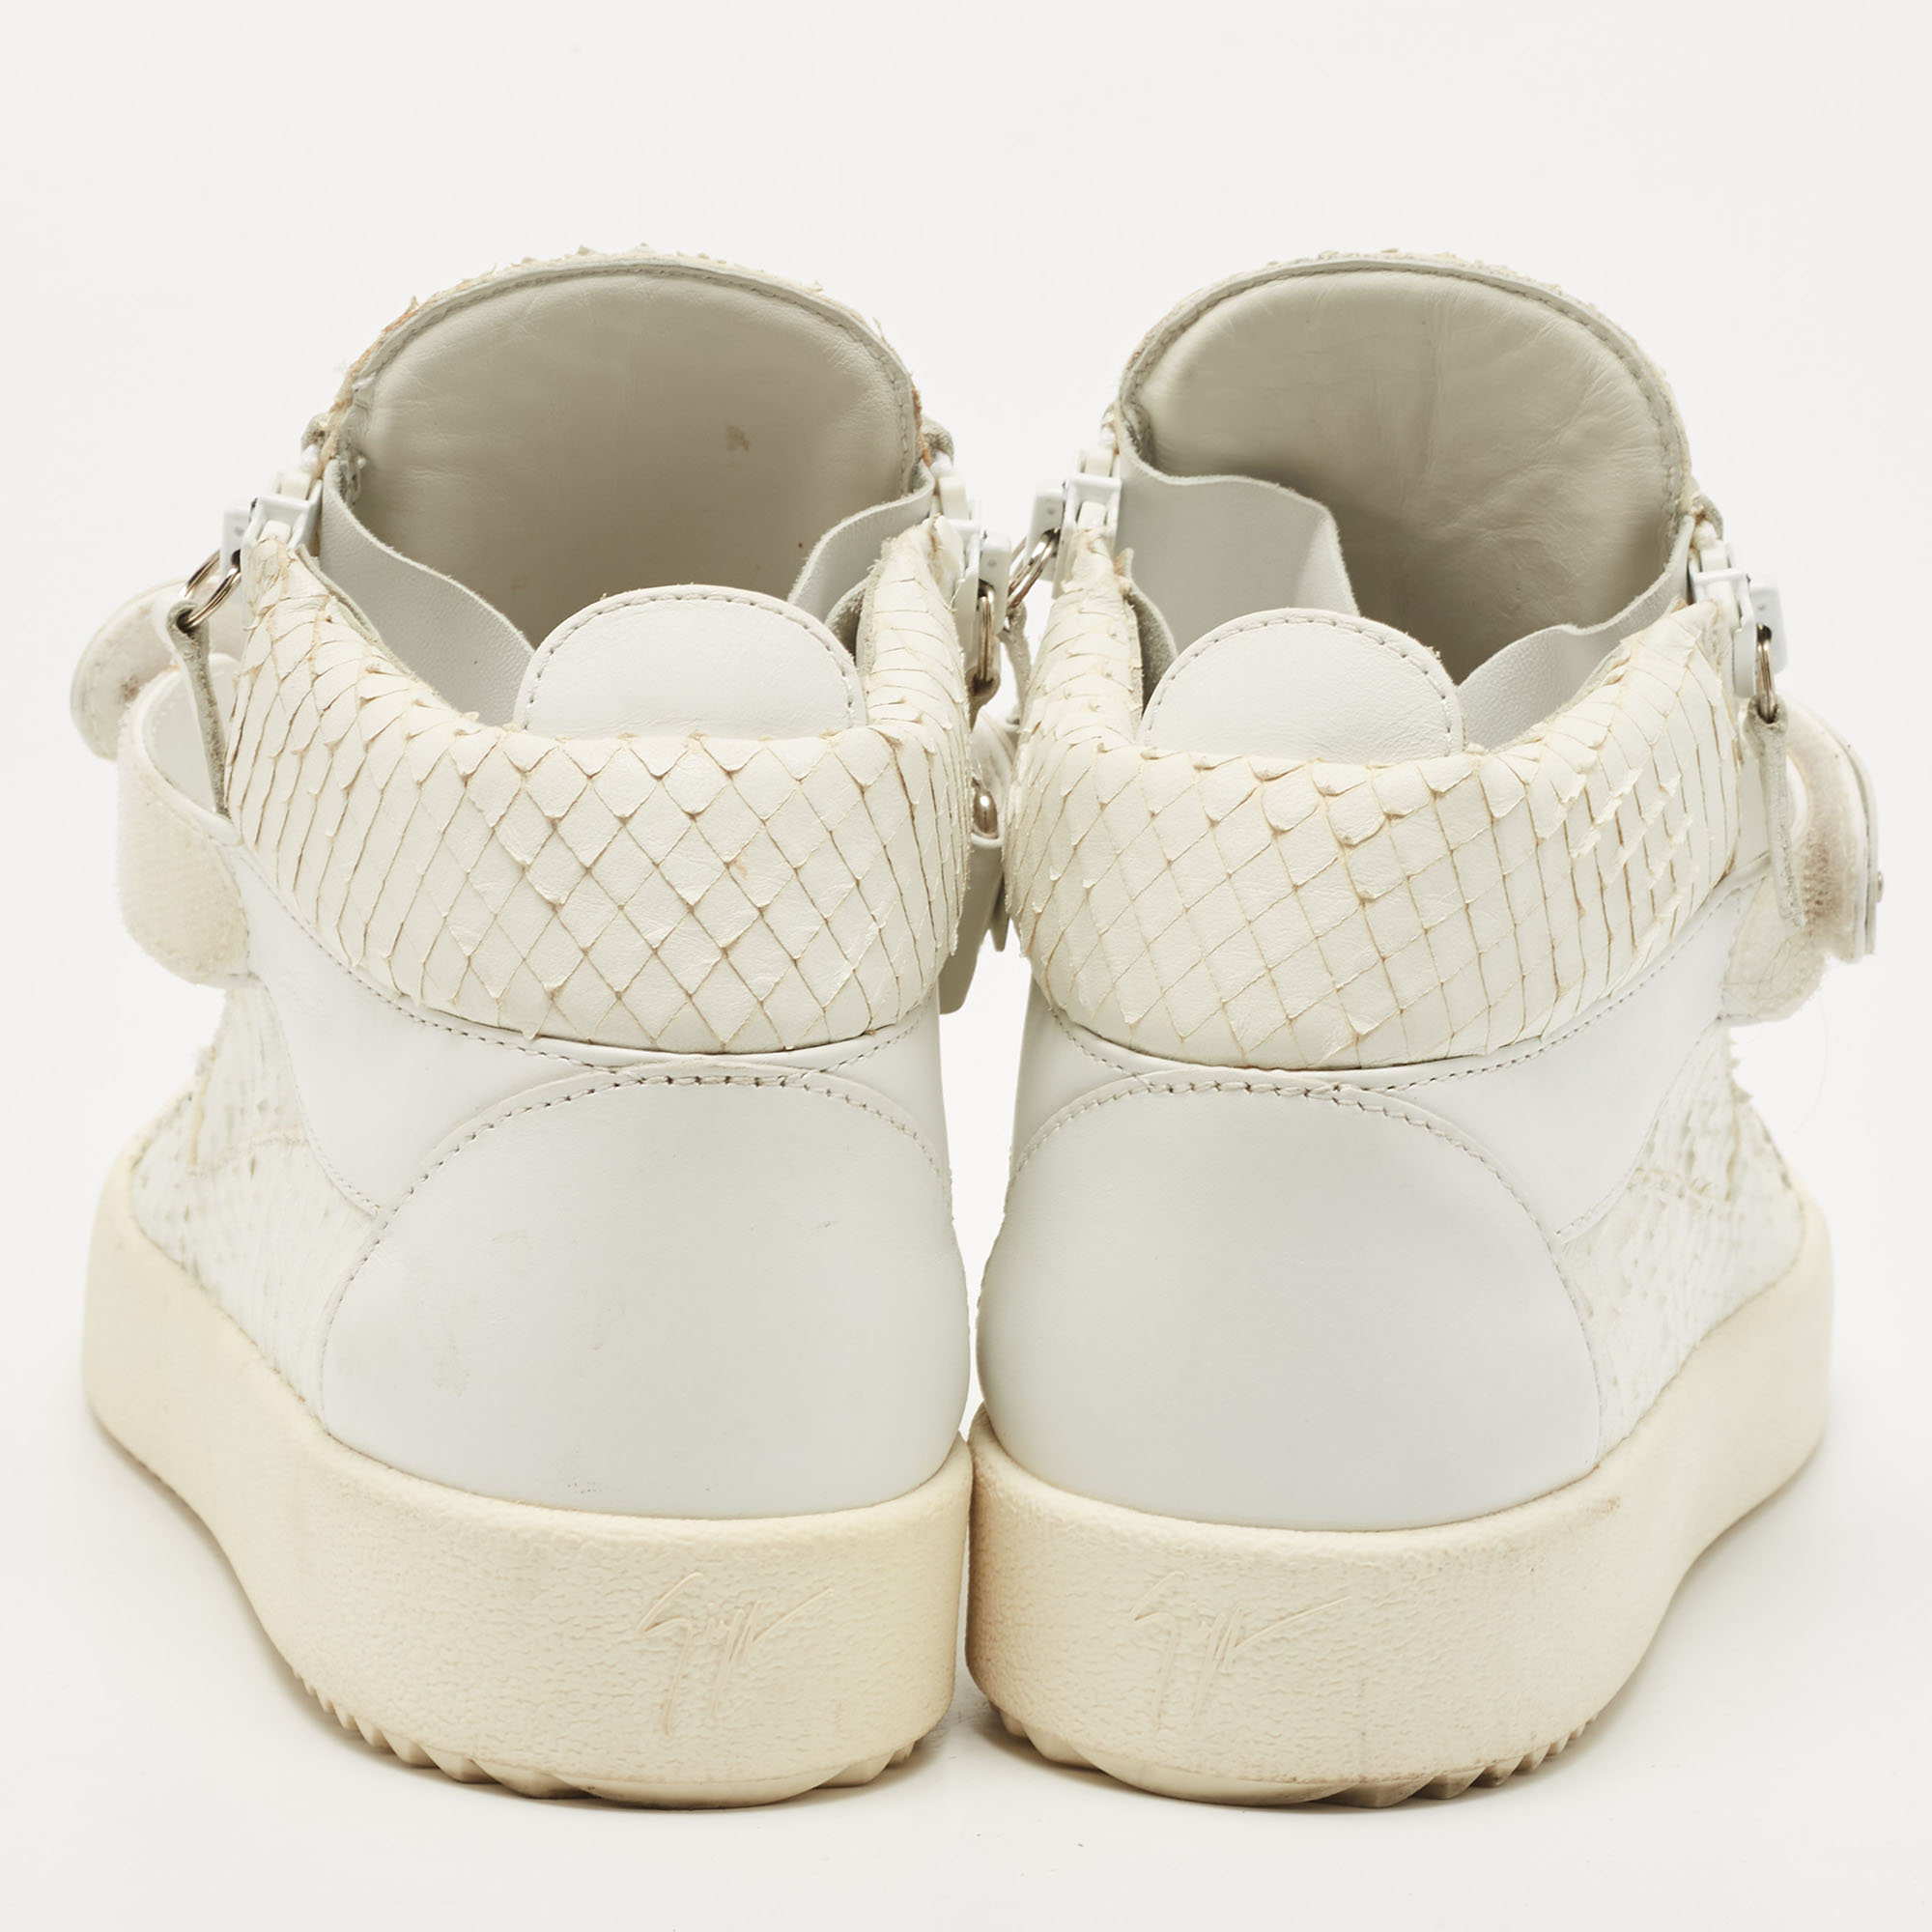 Giuseppe Zanotti White Python Embossed And Leather Coby High Top Sneakers Size 41